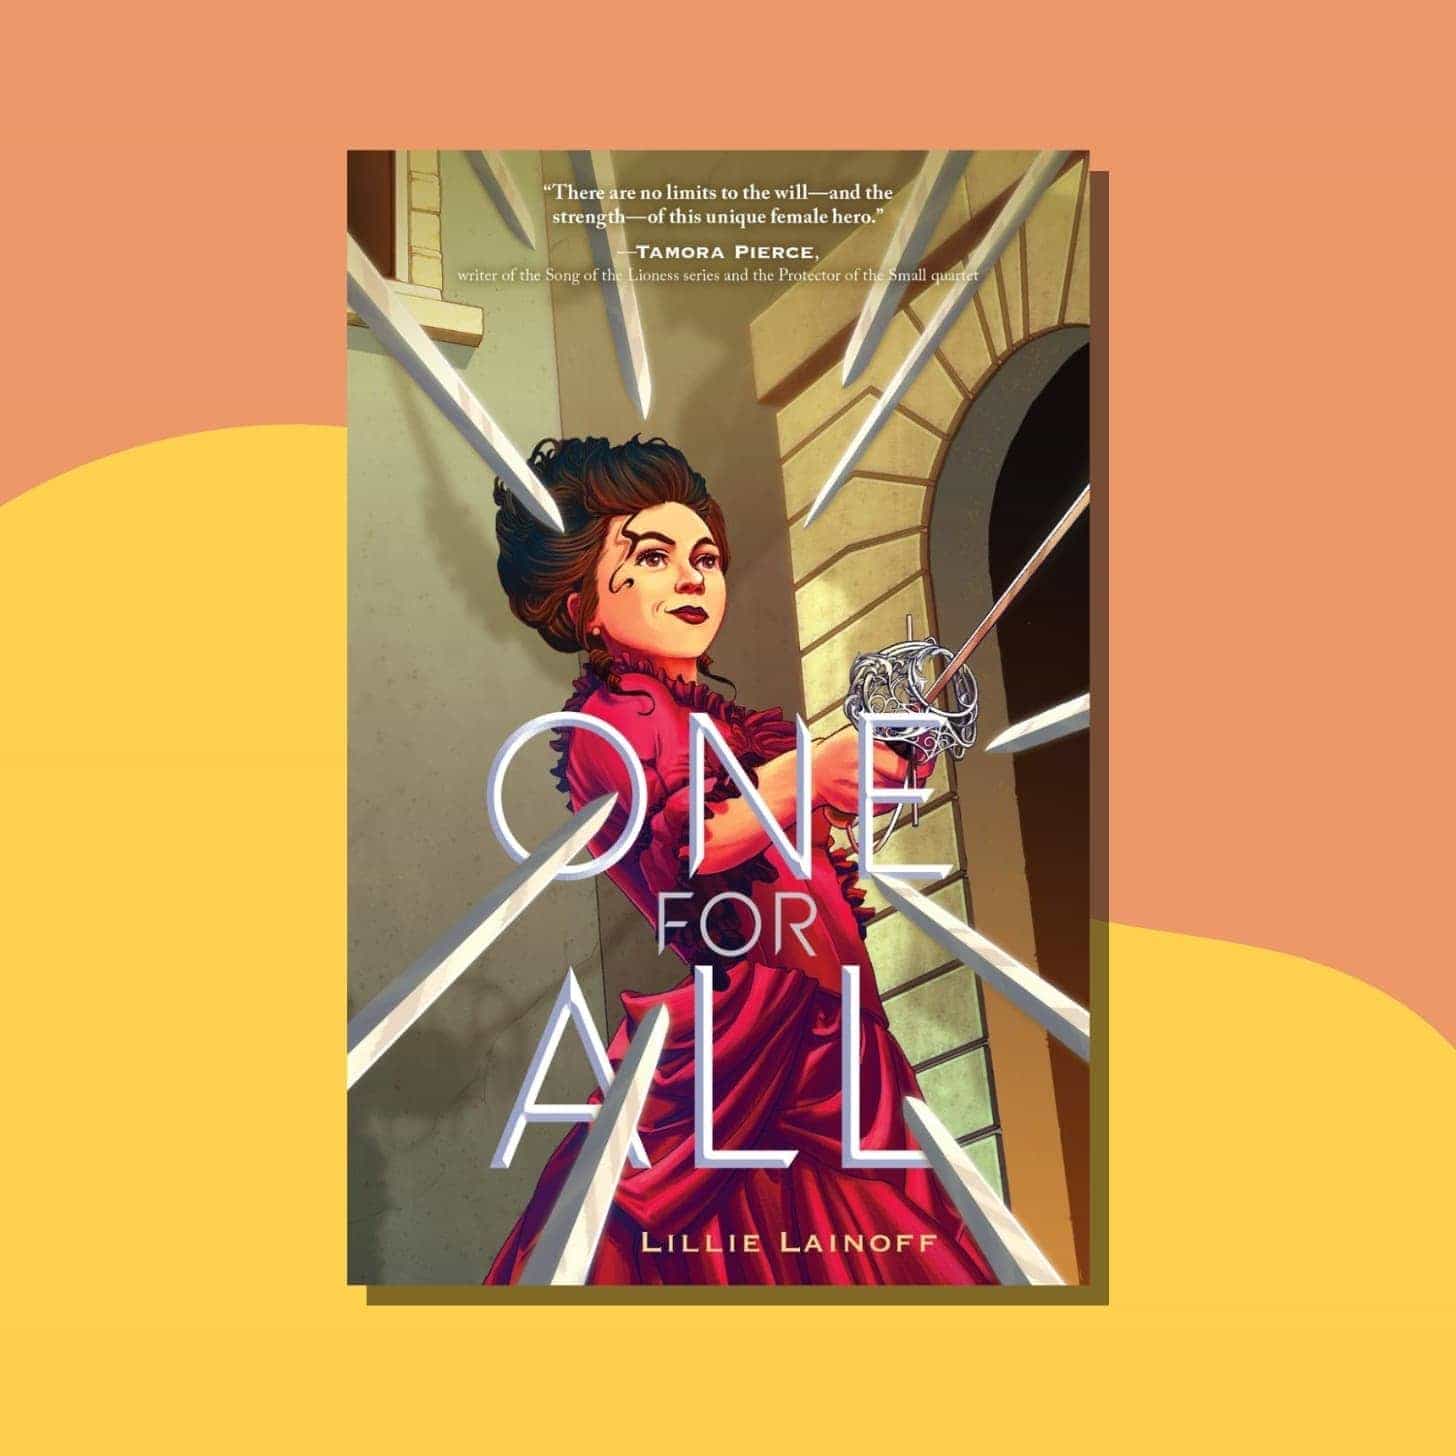 “One for All” by Lillie Lainoff - cover shows a bunch of swords pointing swords at a woman in a ball gown, also holding a sword